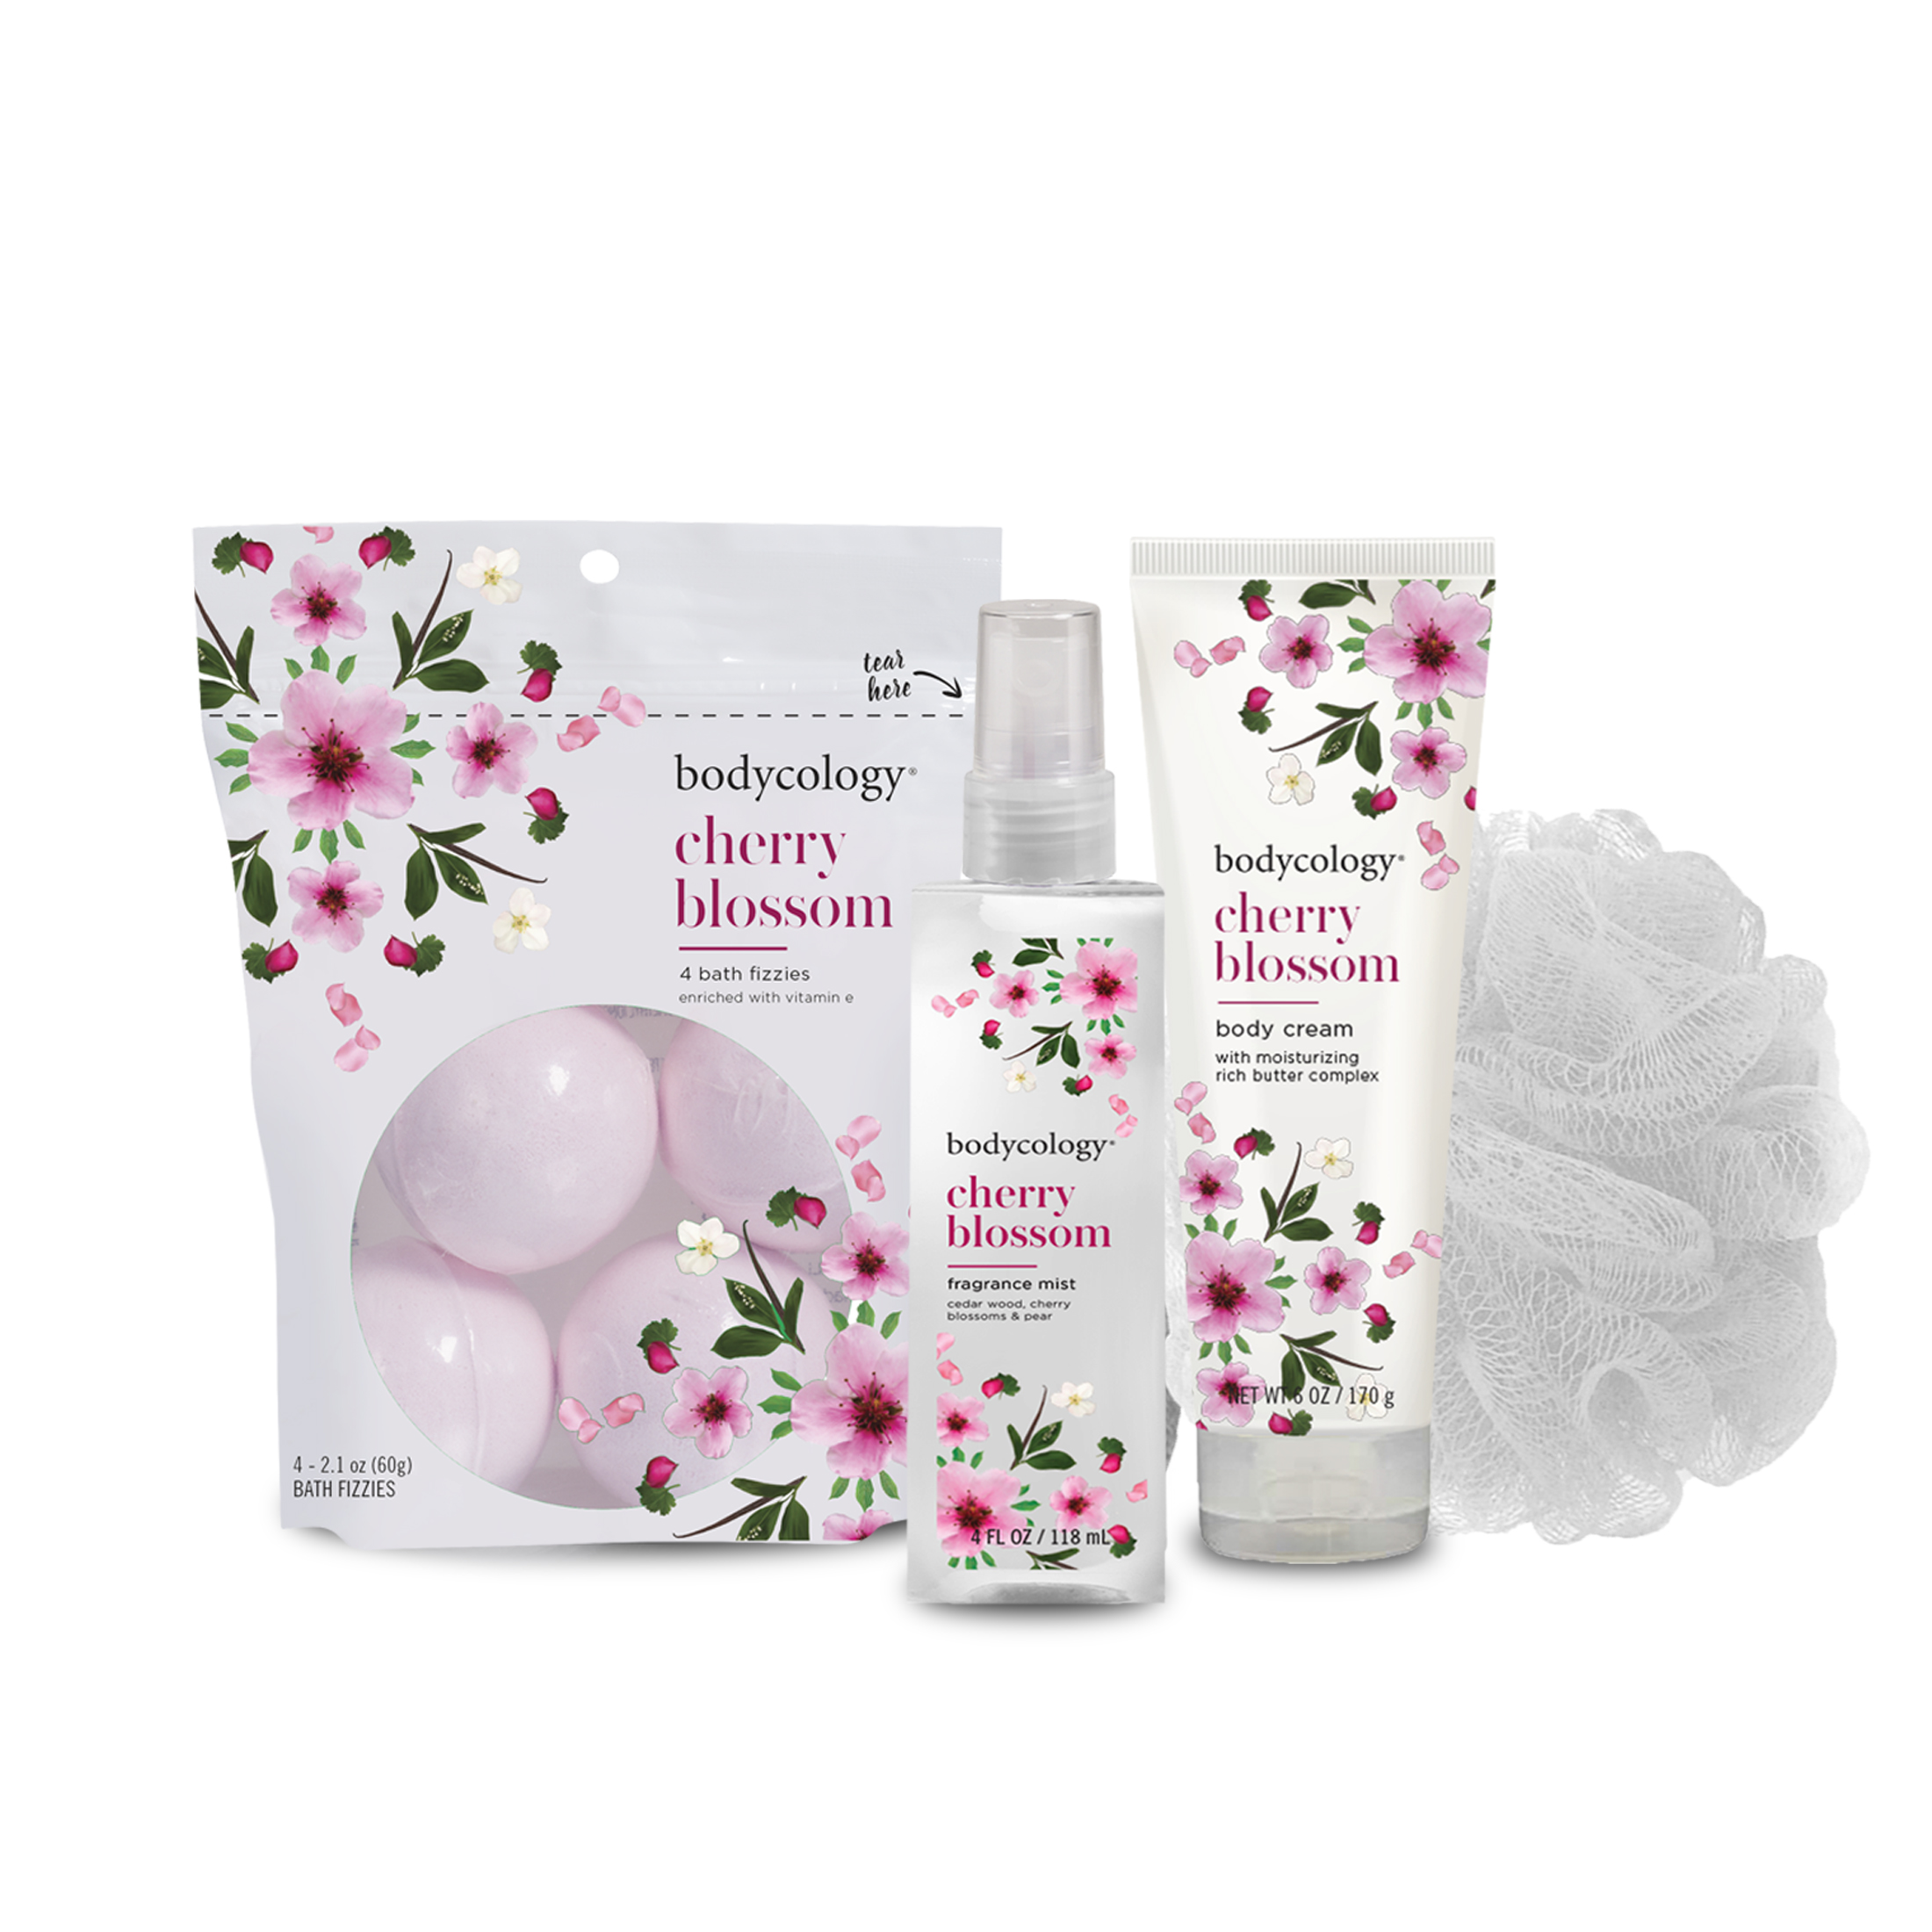 Bodycology Cherry Blossom Relaxed Robe Bath & Body Gift Set, 5 PC - image 3 of 6